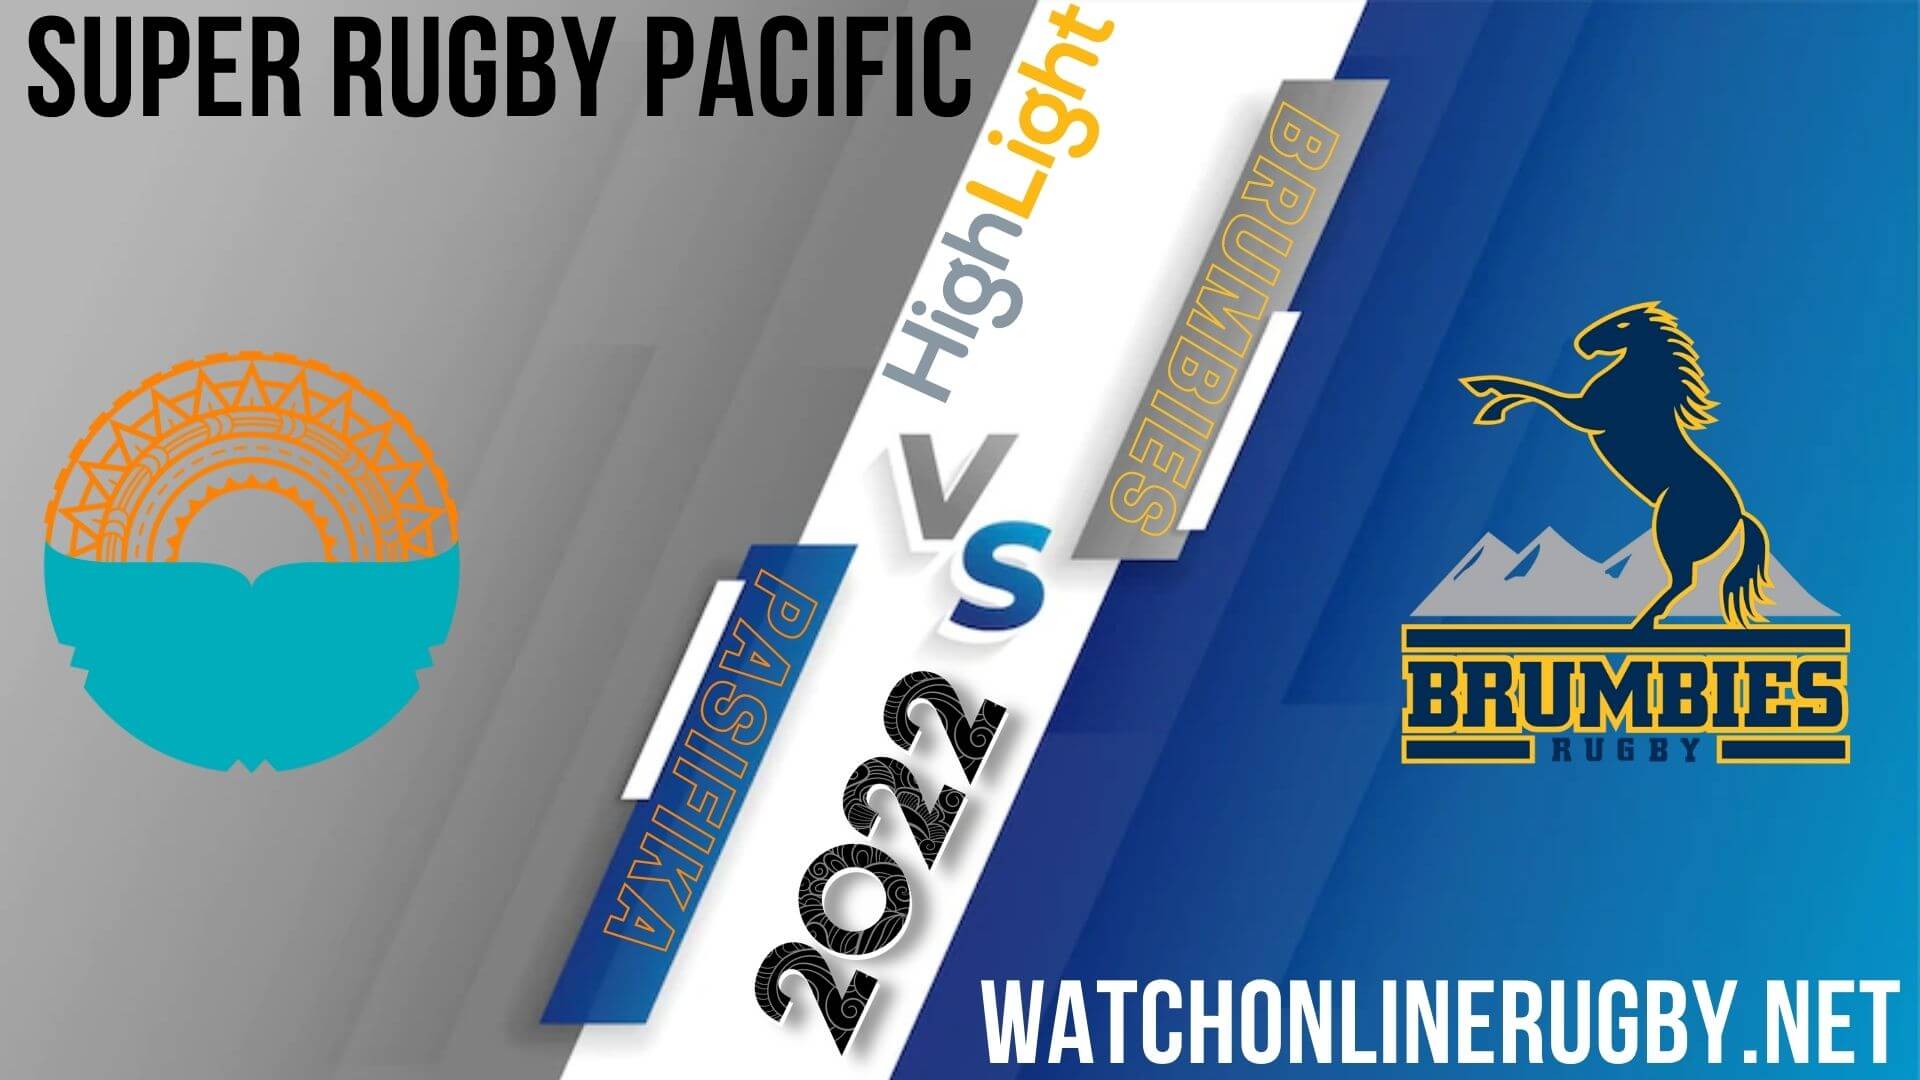 Moana Pasifika Vs Brumbies Super Rugby Pacific 2022 RD 15